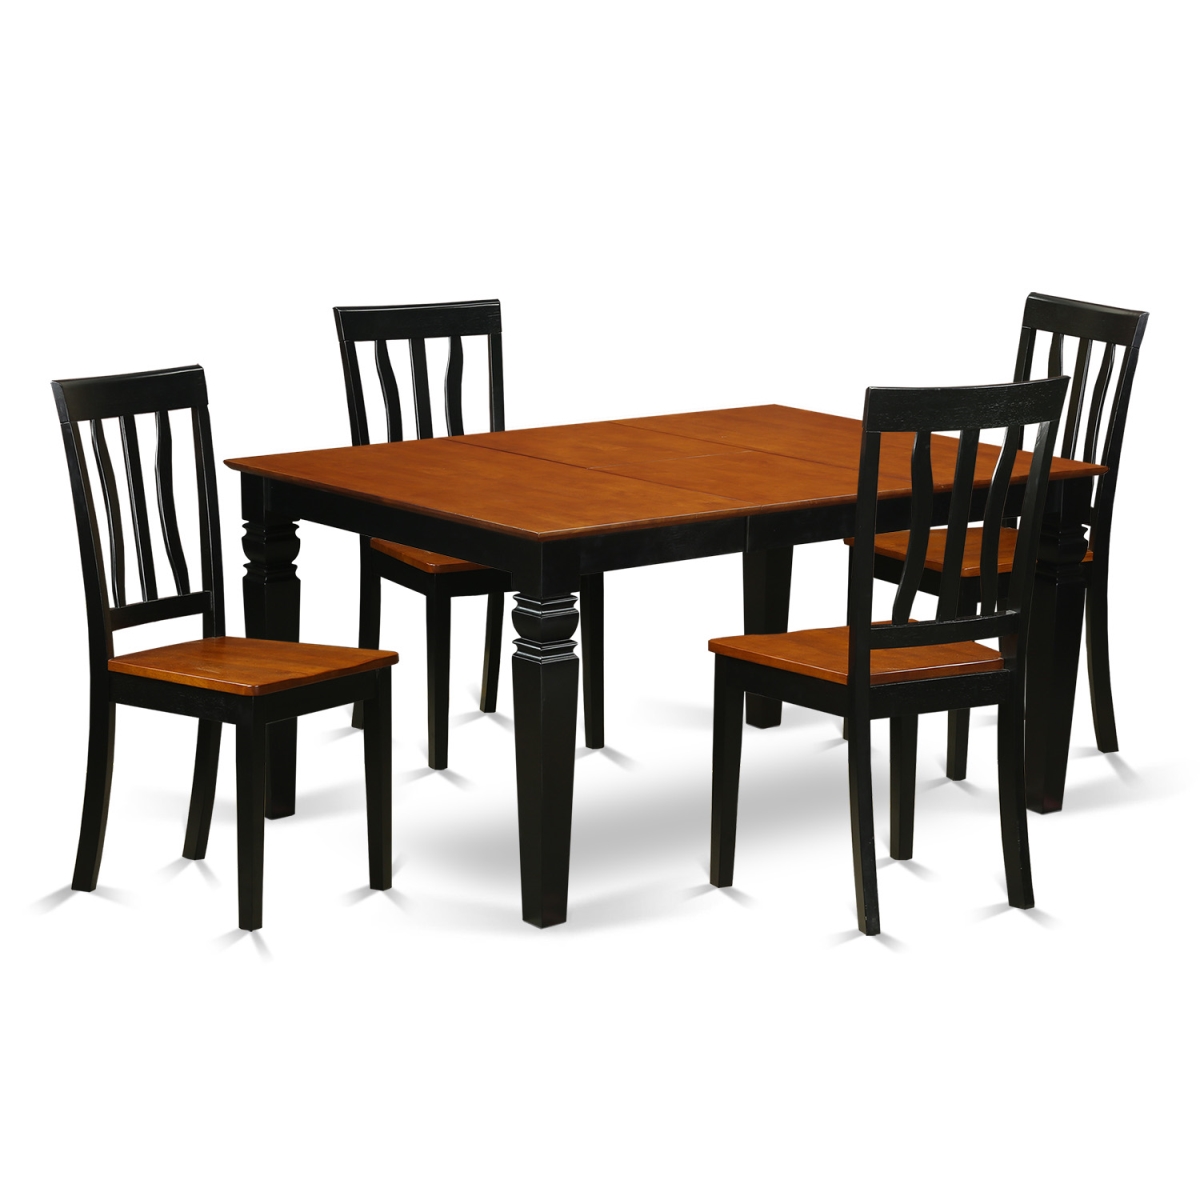 WEAN5-BCH-W Kitchen Table Set with One Weston Dining Room Table & Four Solid Wood Seat Chairs, Luxurious Black - 5 Piece -  East West Furniture